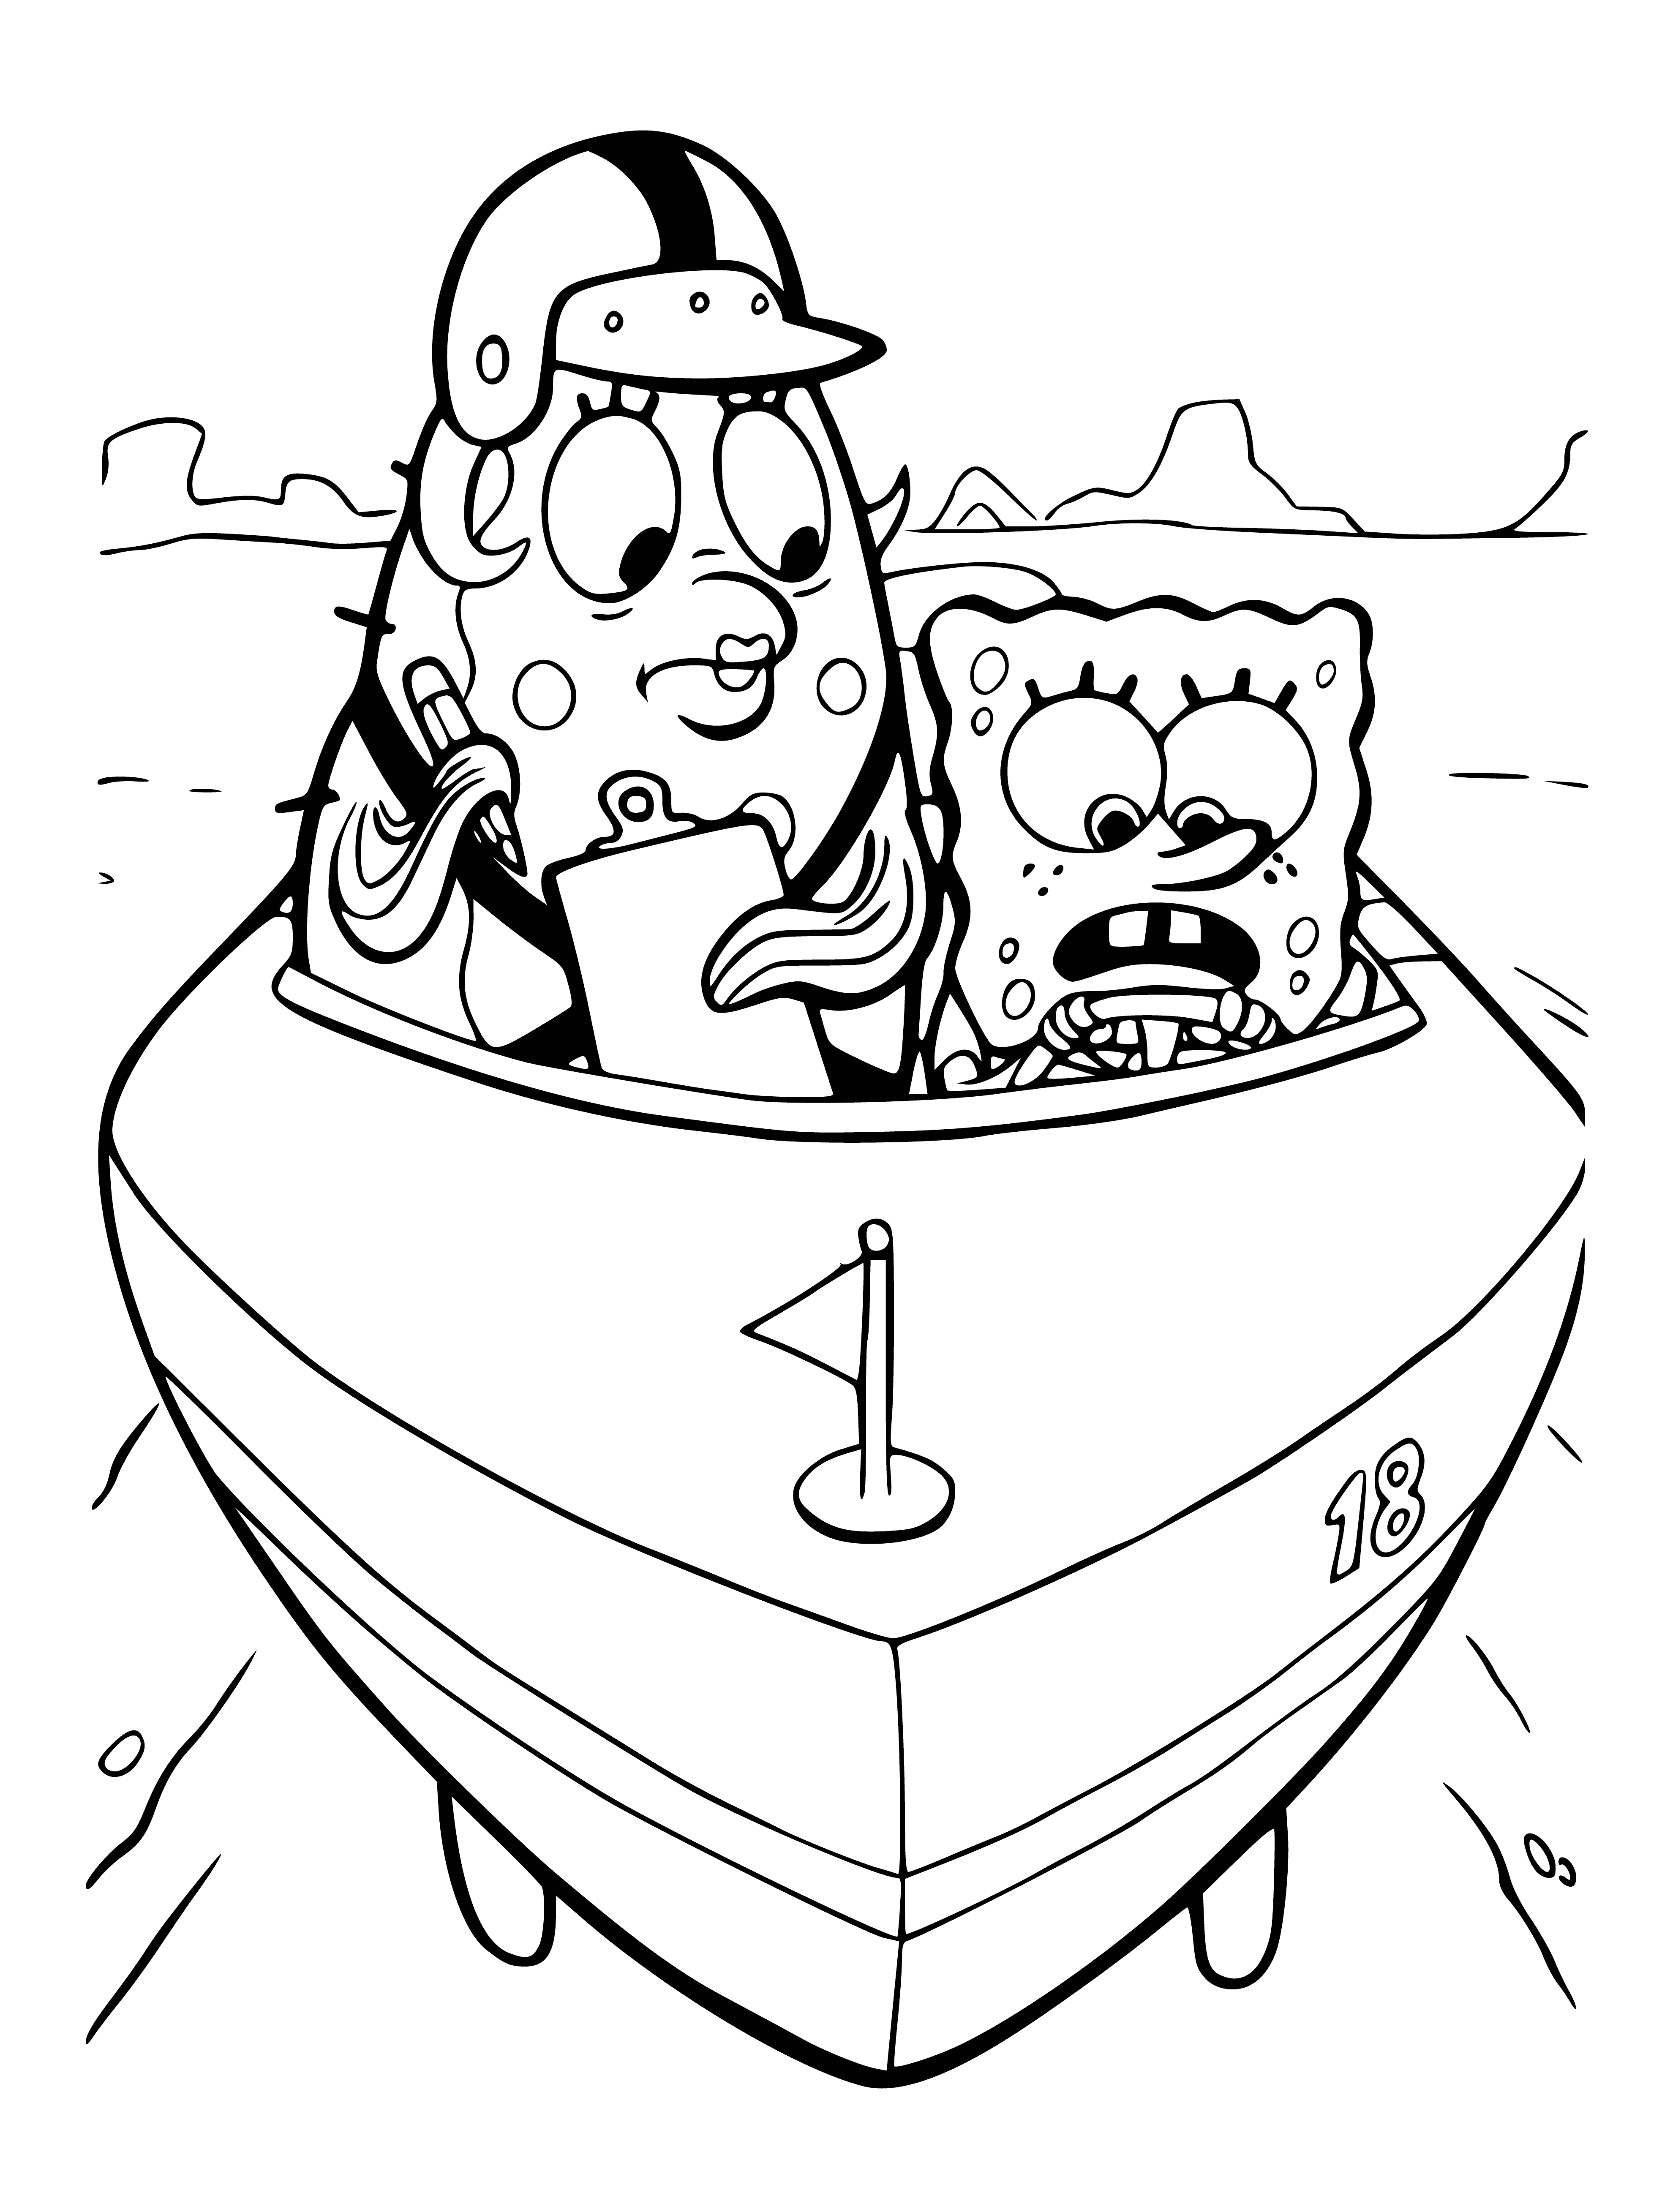 coloring page: SpongeBob is a fry cook at the Krusty Krab, loves playing the clarinet, jellyfishing, and blowing bubbles. He lives with his pet snail Gary in a pineapple under the sea.